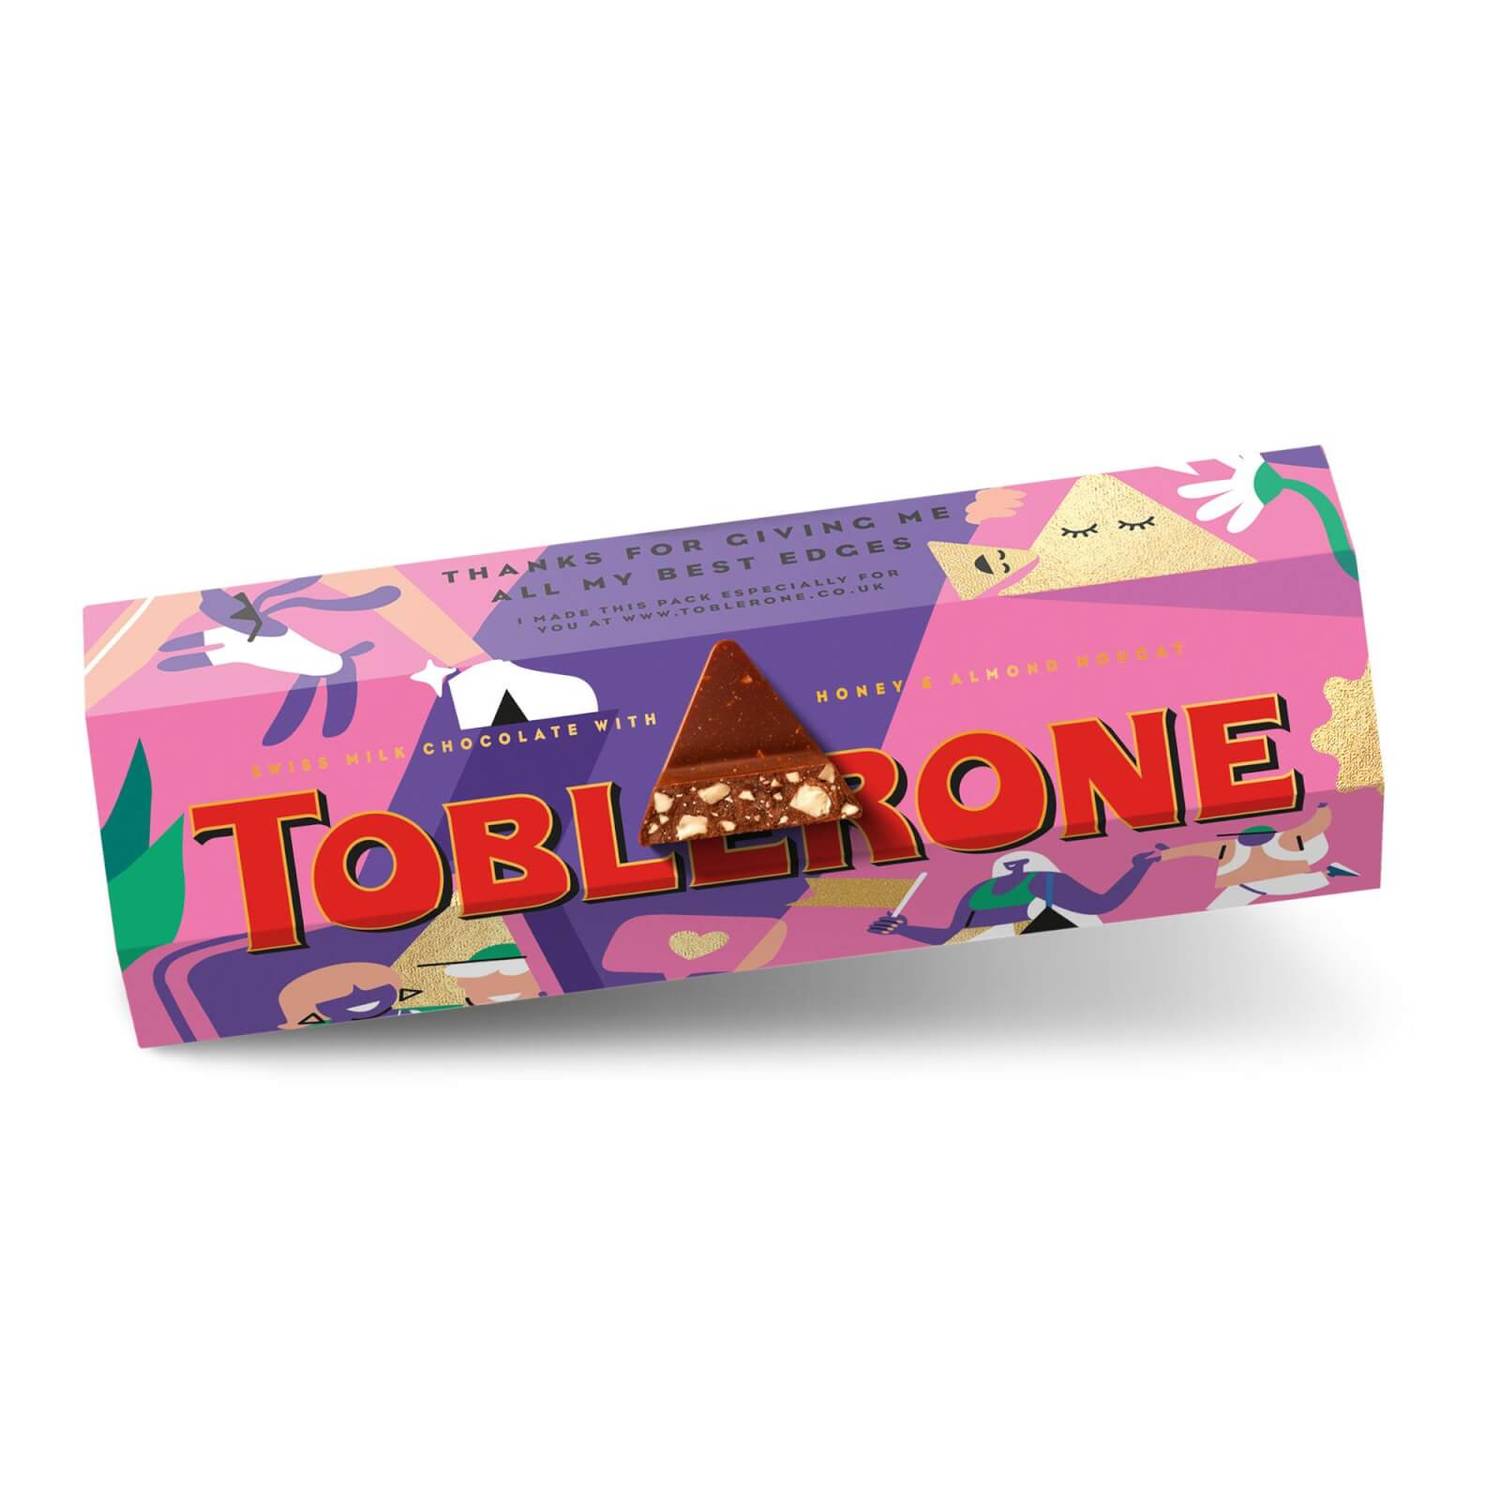 Customised Toblerone package with the message 'Thank you for giving me all my best edges'. 